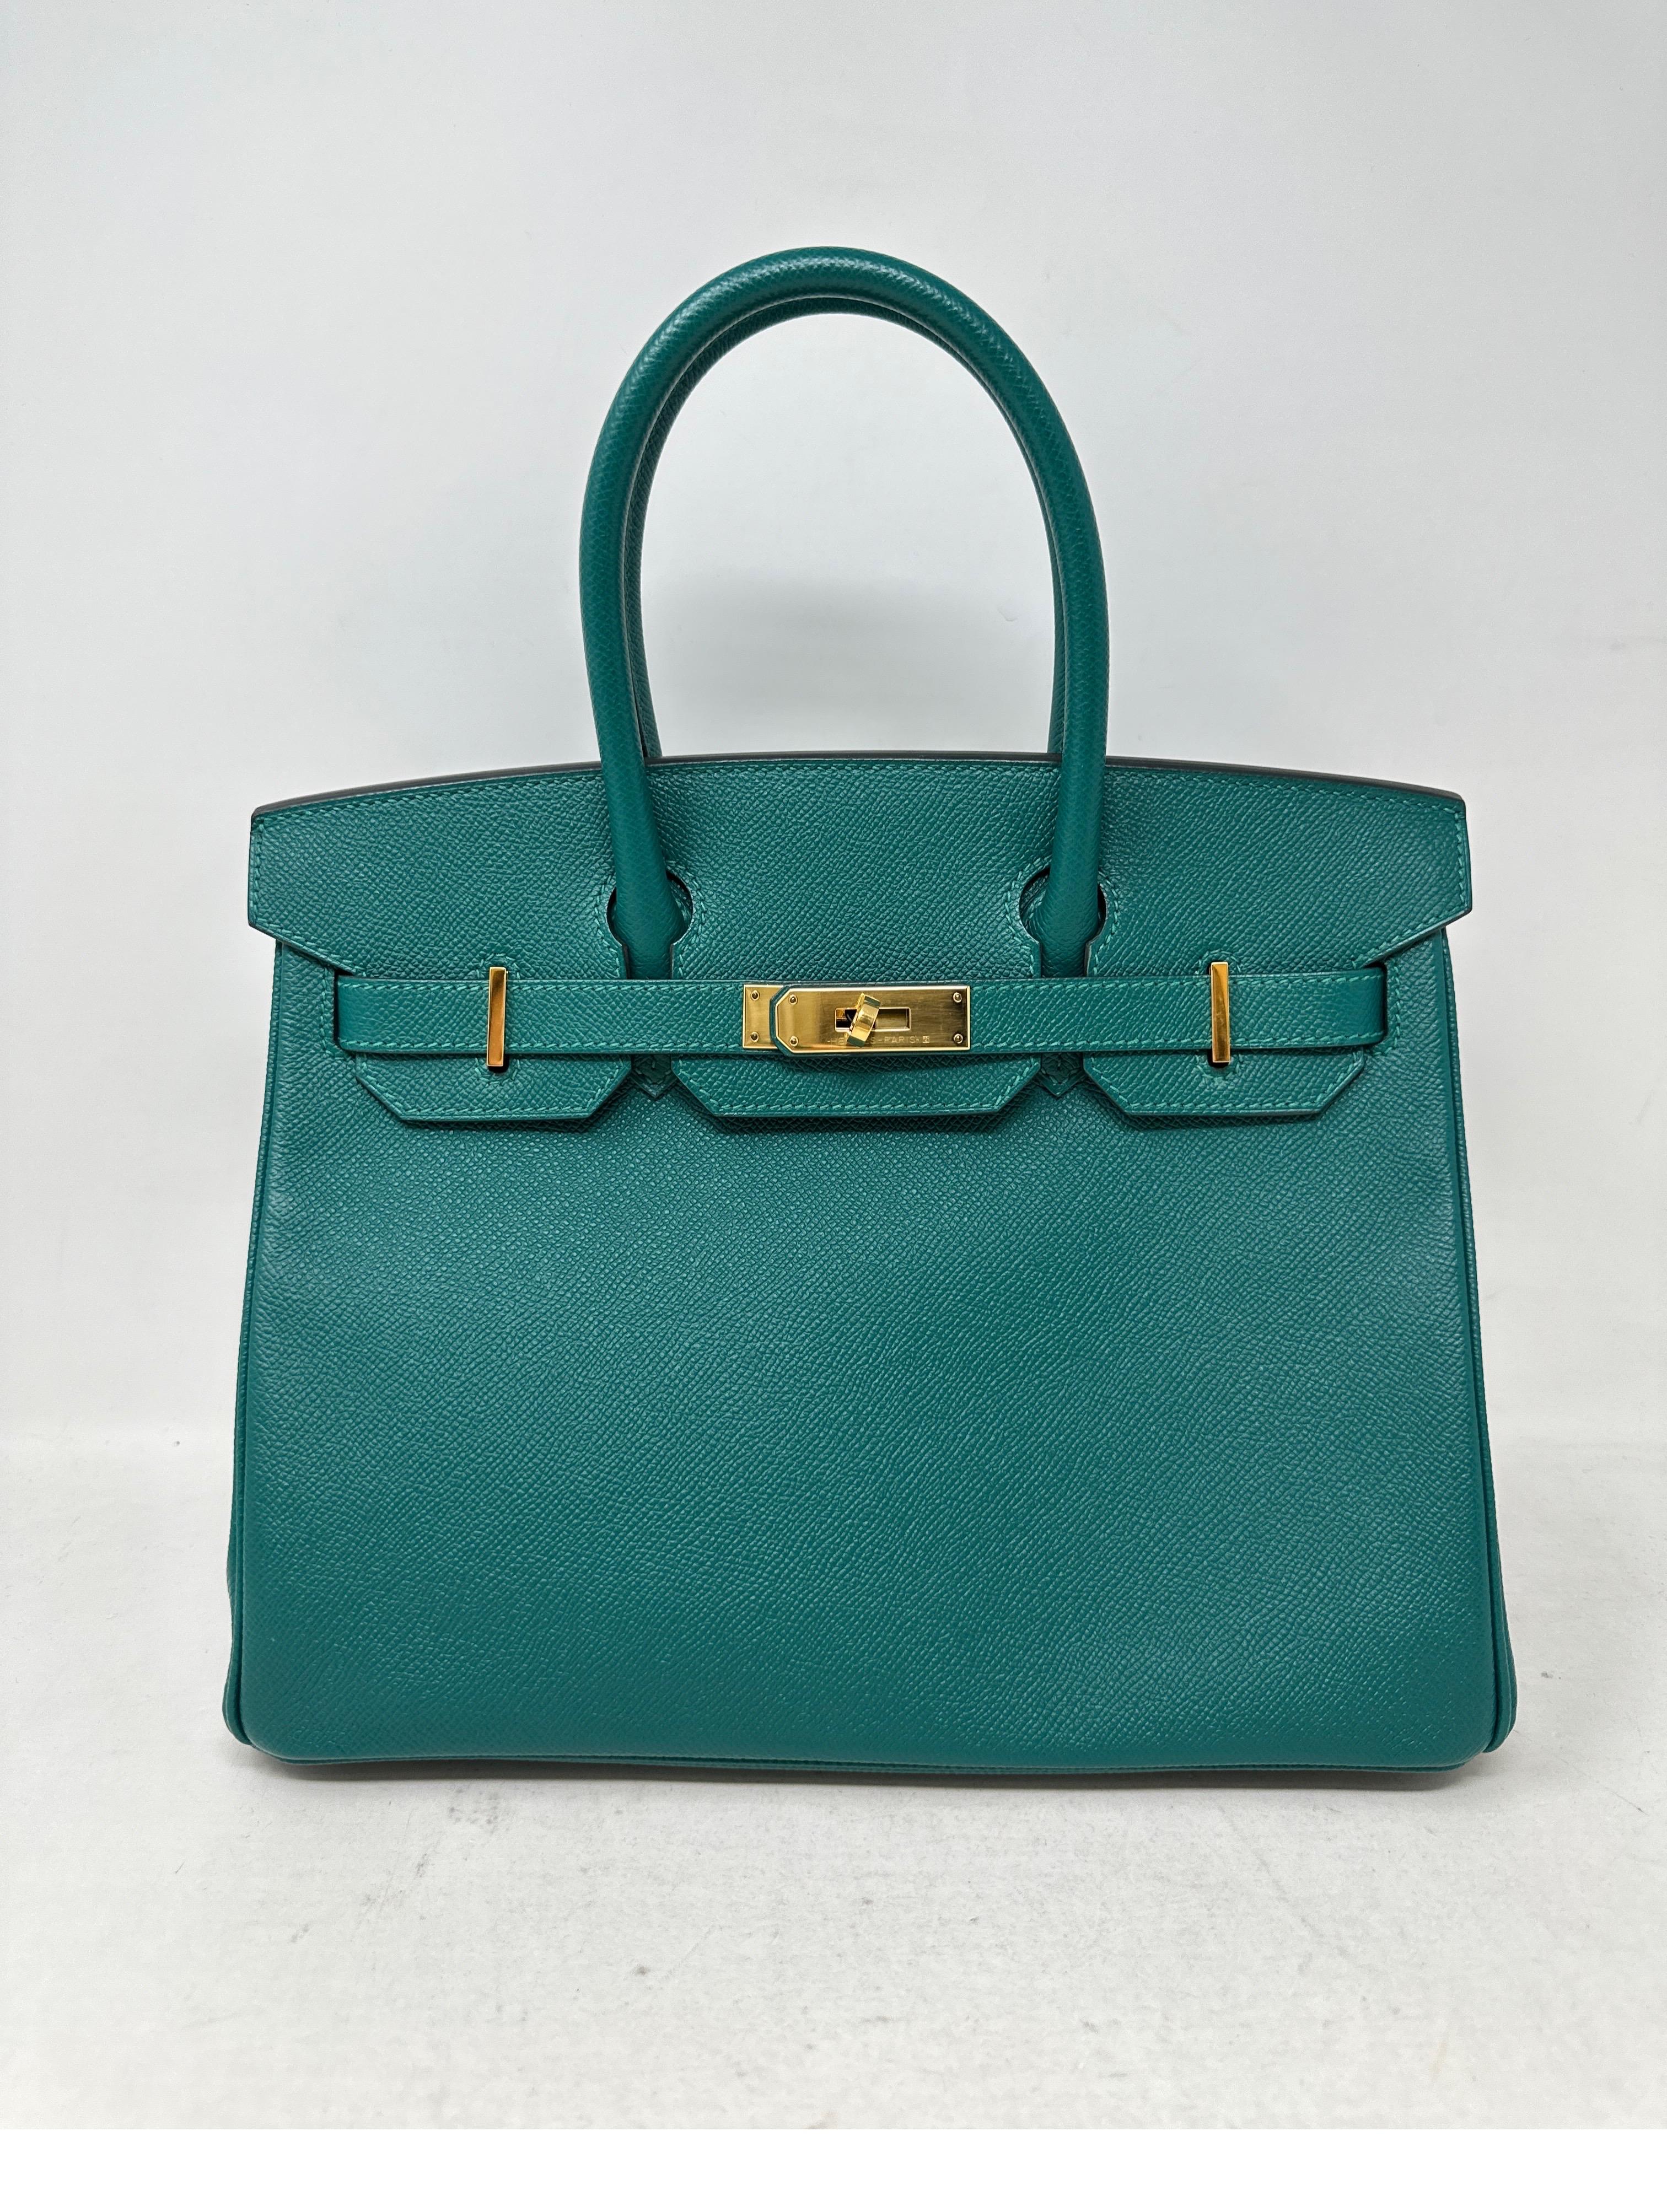 Hermes Malachite Birkin 30 Bag. Excellent like new condition. Gold hardware. Epsom leather. Gorgeous neutral green color. Interior clean. A stamp. Newer Birkin. Includes clochette, lock, keys, and dust bag. Guaranteed authentic. 